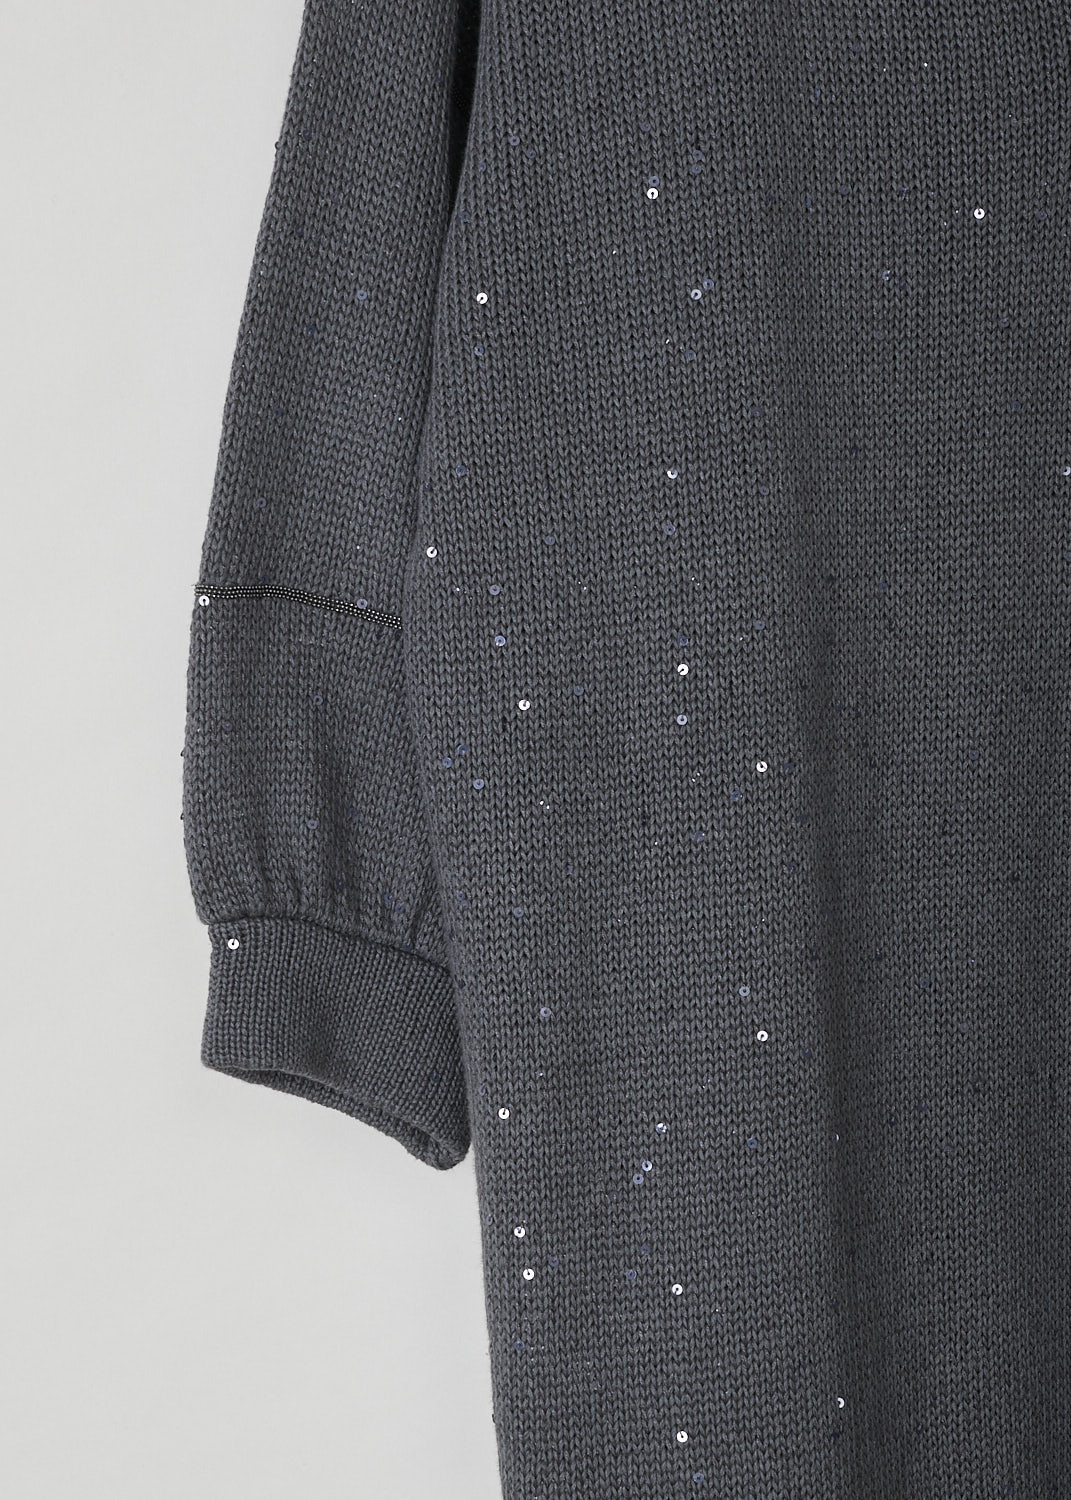 BRUNELLO CUCINELLI, GREY KNITTED SWEATER DRESS WITH SEQUINS, M70573A82_CJ079, Grey, Detail, This grey knitted sweater dress has a V-neckline, dropped shoulders and three-quarter sleeves. The neckline, cuffs and hemline have a ribbed finish. The dress has sequins sewn in throughout and along the shoulders and across the sleeves, monili beaded strips can be found. The dress has a wider silhouette.  
